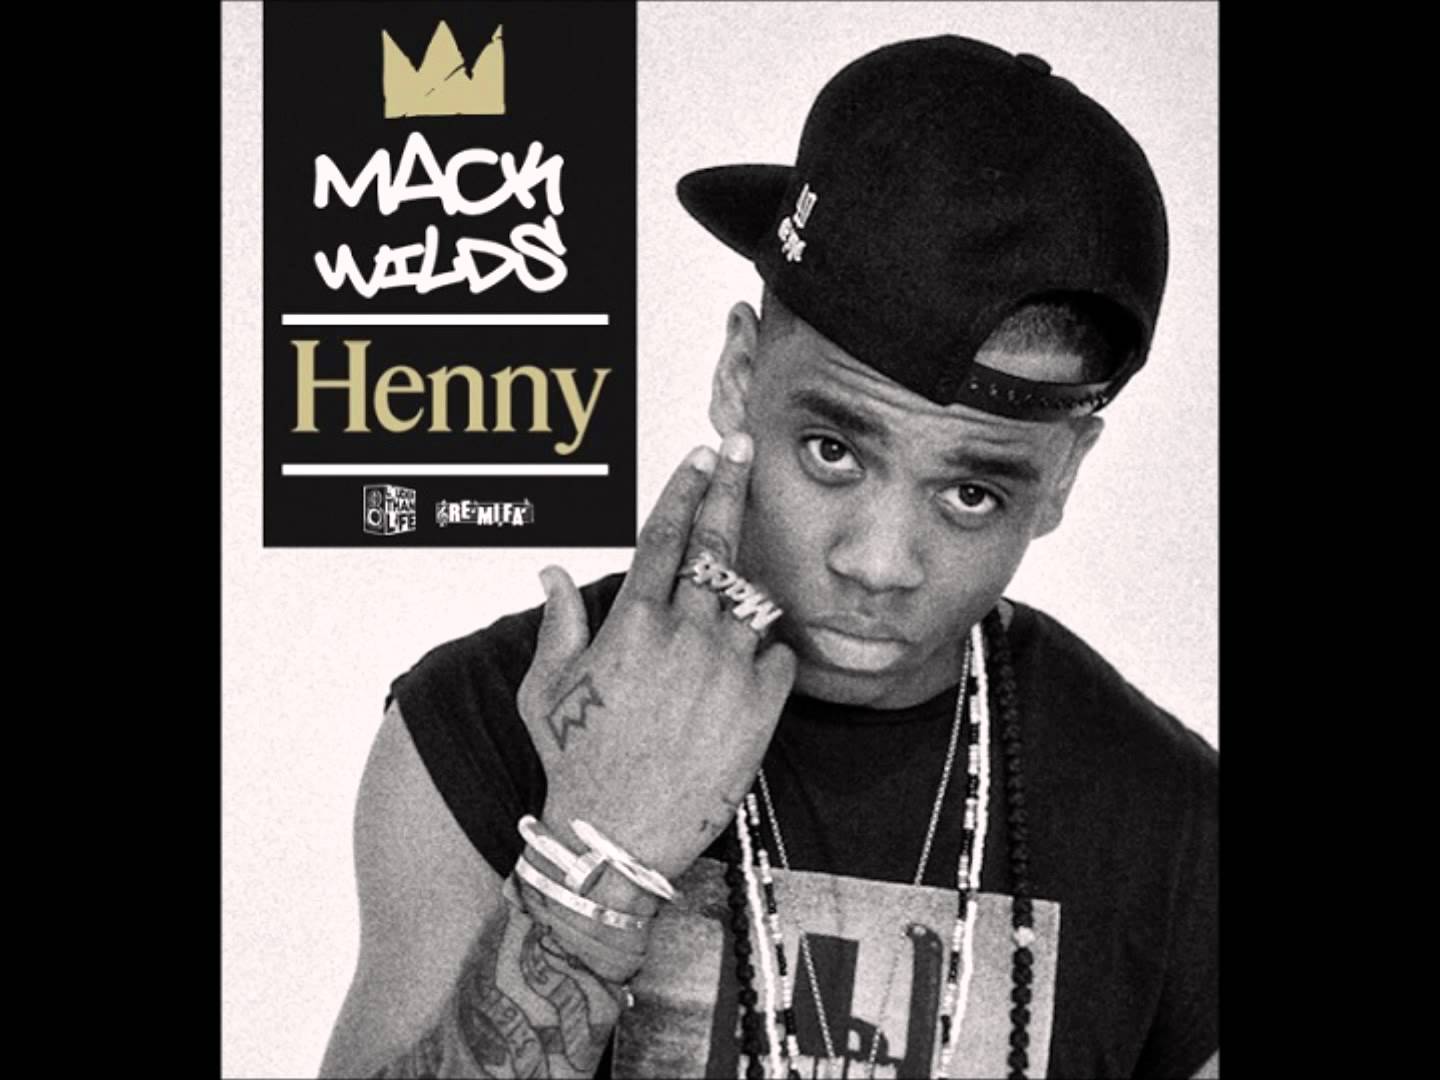 Behind the Scenes Video of Mack Wilds' "Henny" Remix Video Shoot